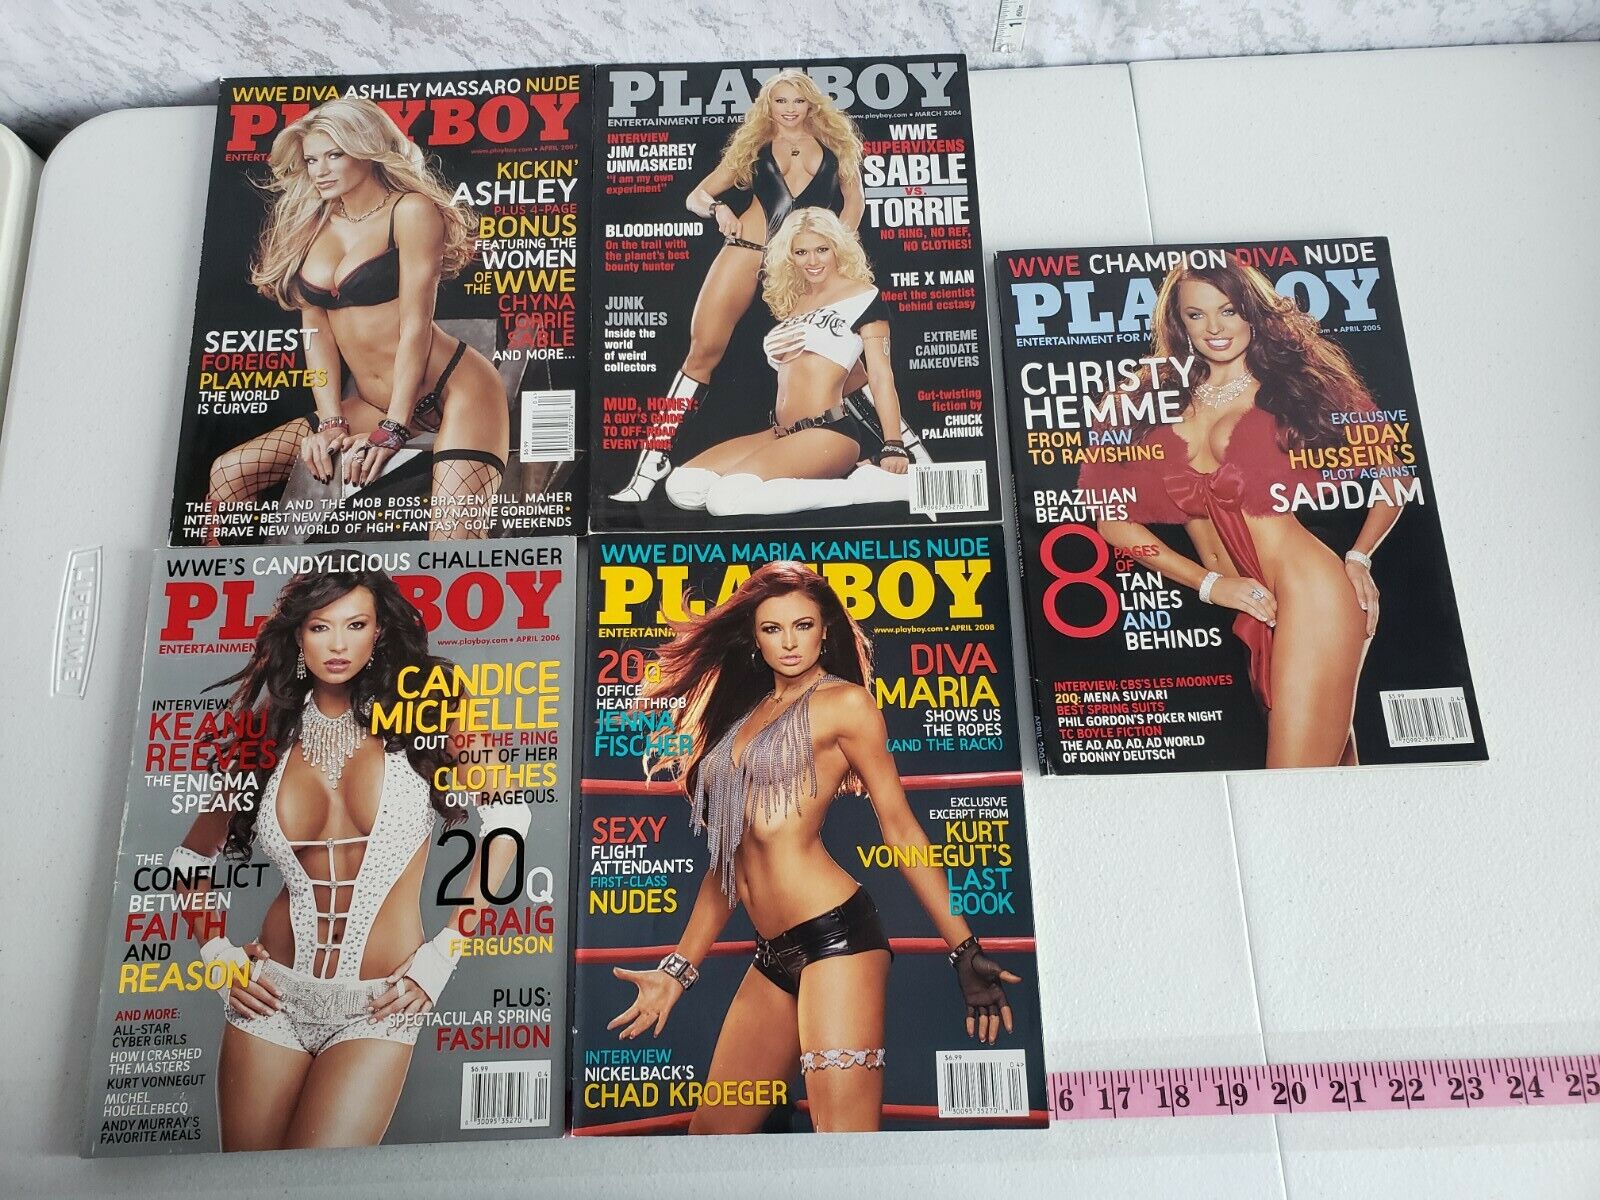 Wwe Divas Playboy Picture pussies tumblr